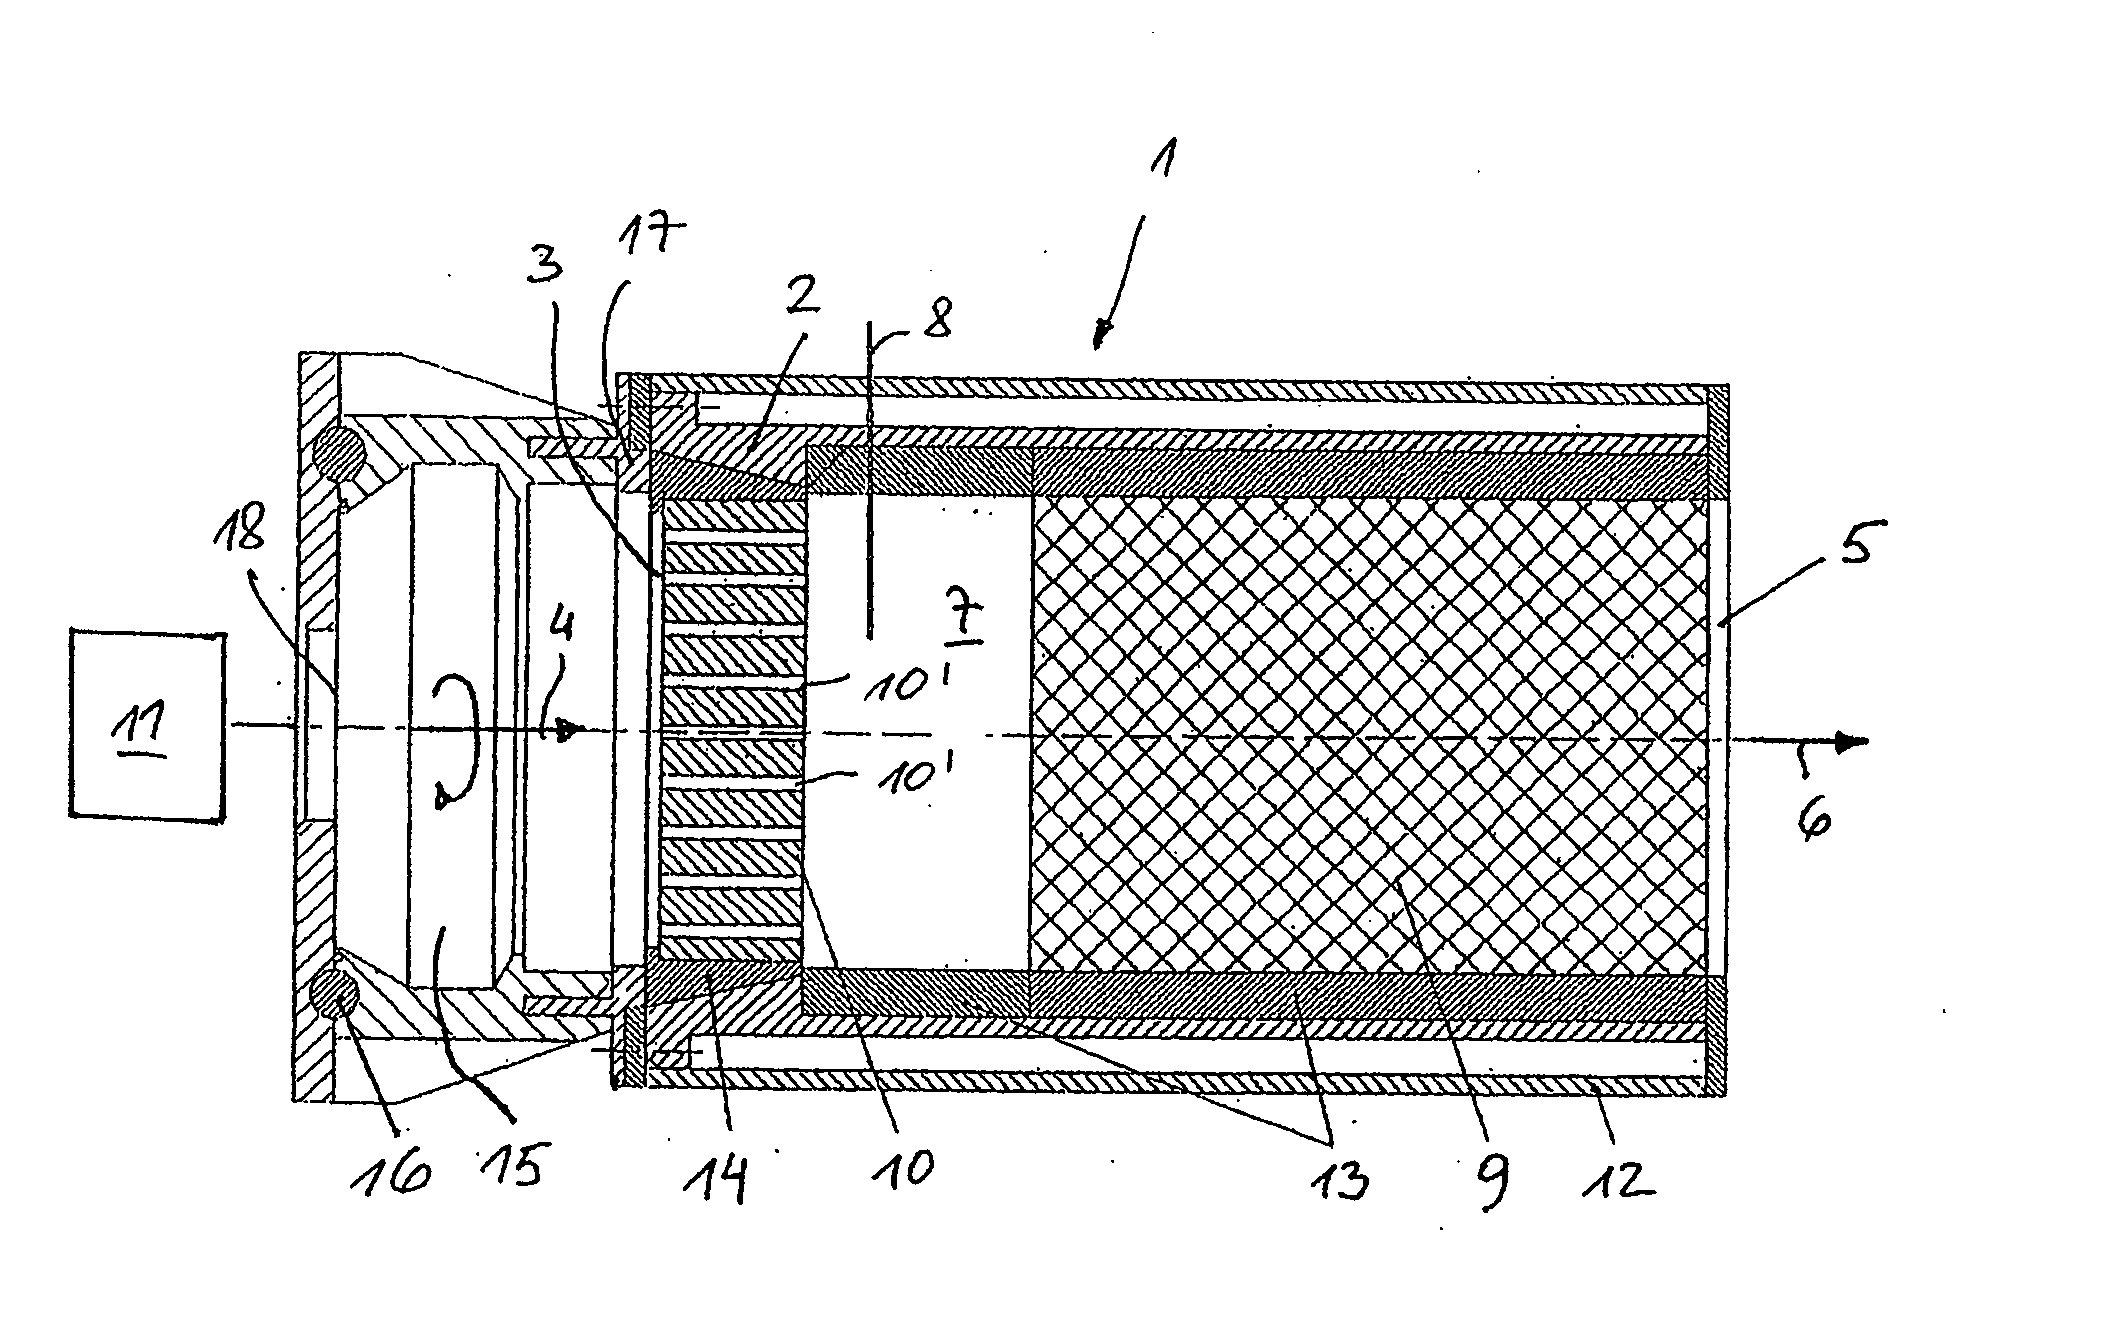 Porous burner as well as a method for operating a porous burner